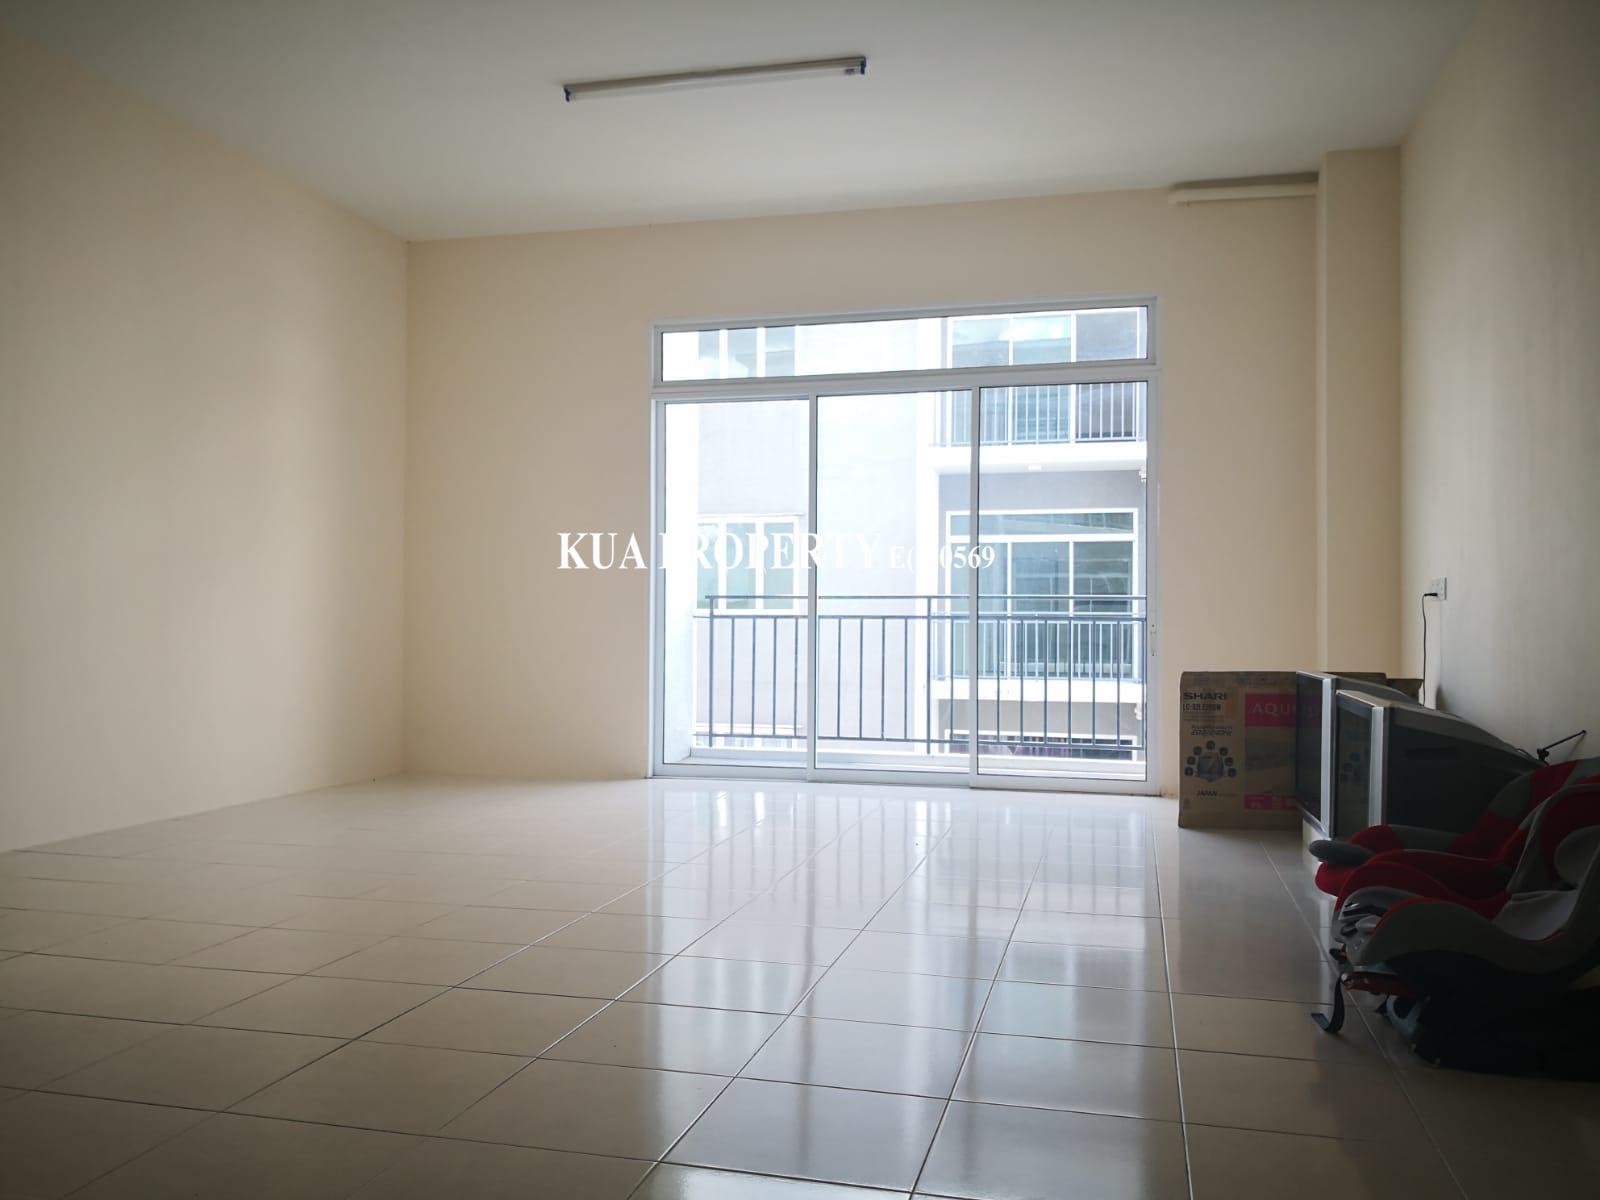 Stutong Height Apartment 1 For Rent! Located at Stutong Baru